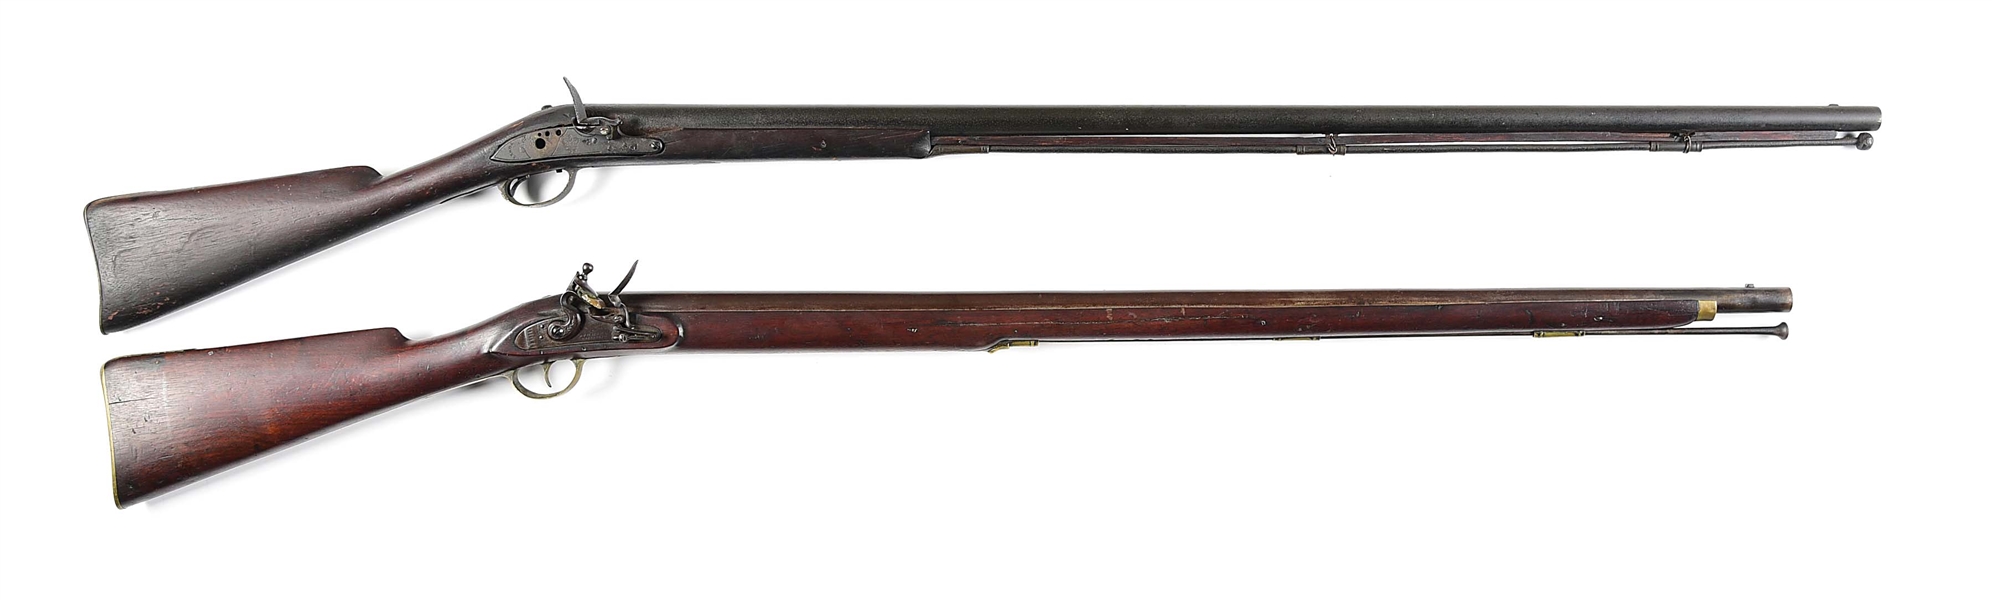 (A) LOT OF 2: ASHMORE WARRANTED FLINTLOCK RIFLE TOGETHER WITH A TOWER FLINTLOCK, TOWER MISSING PARTS.